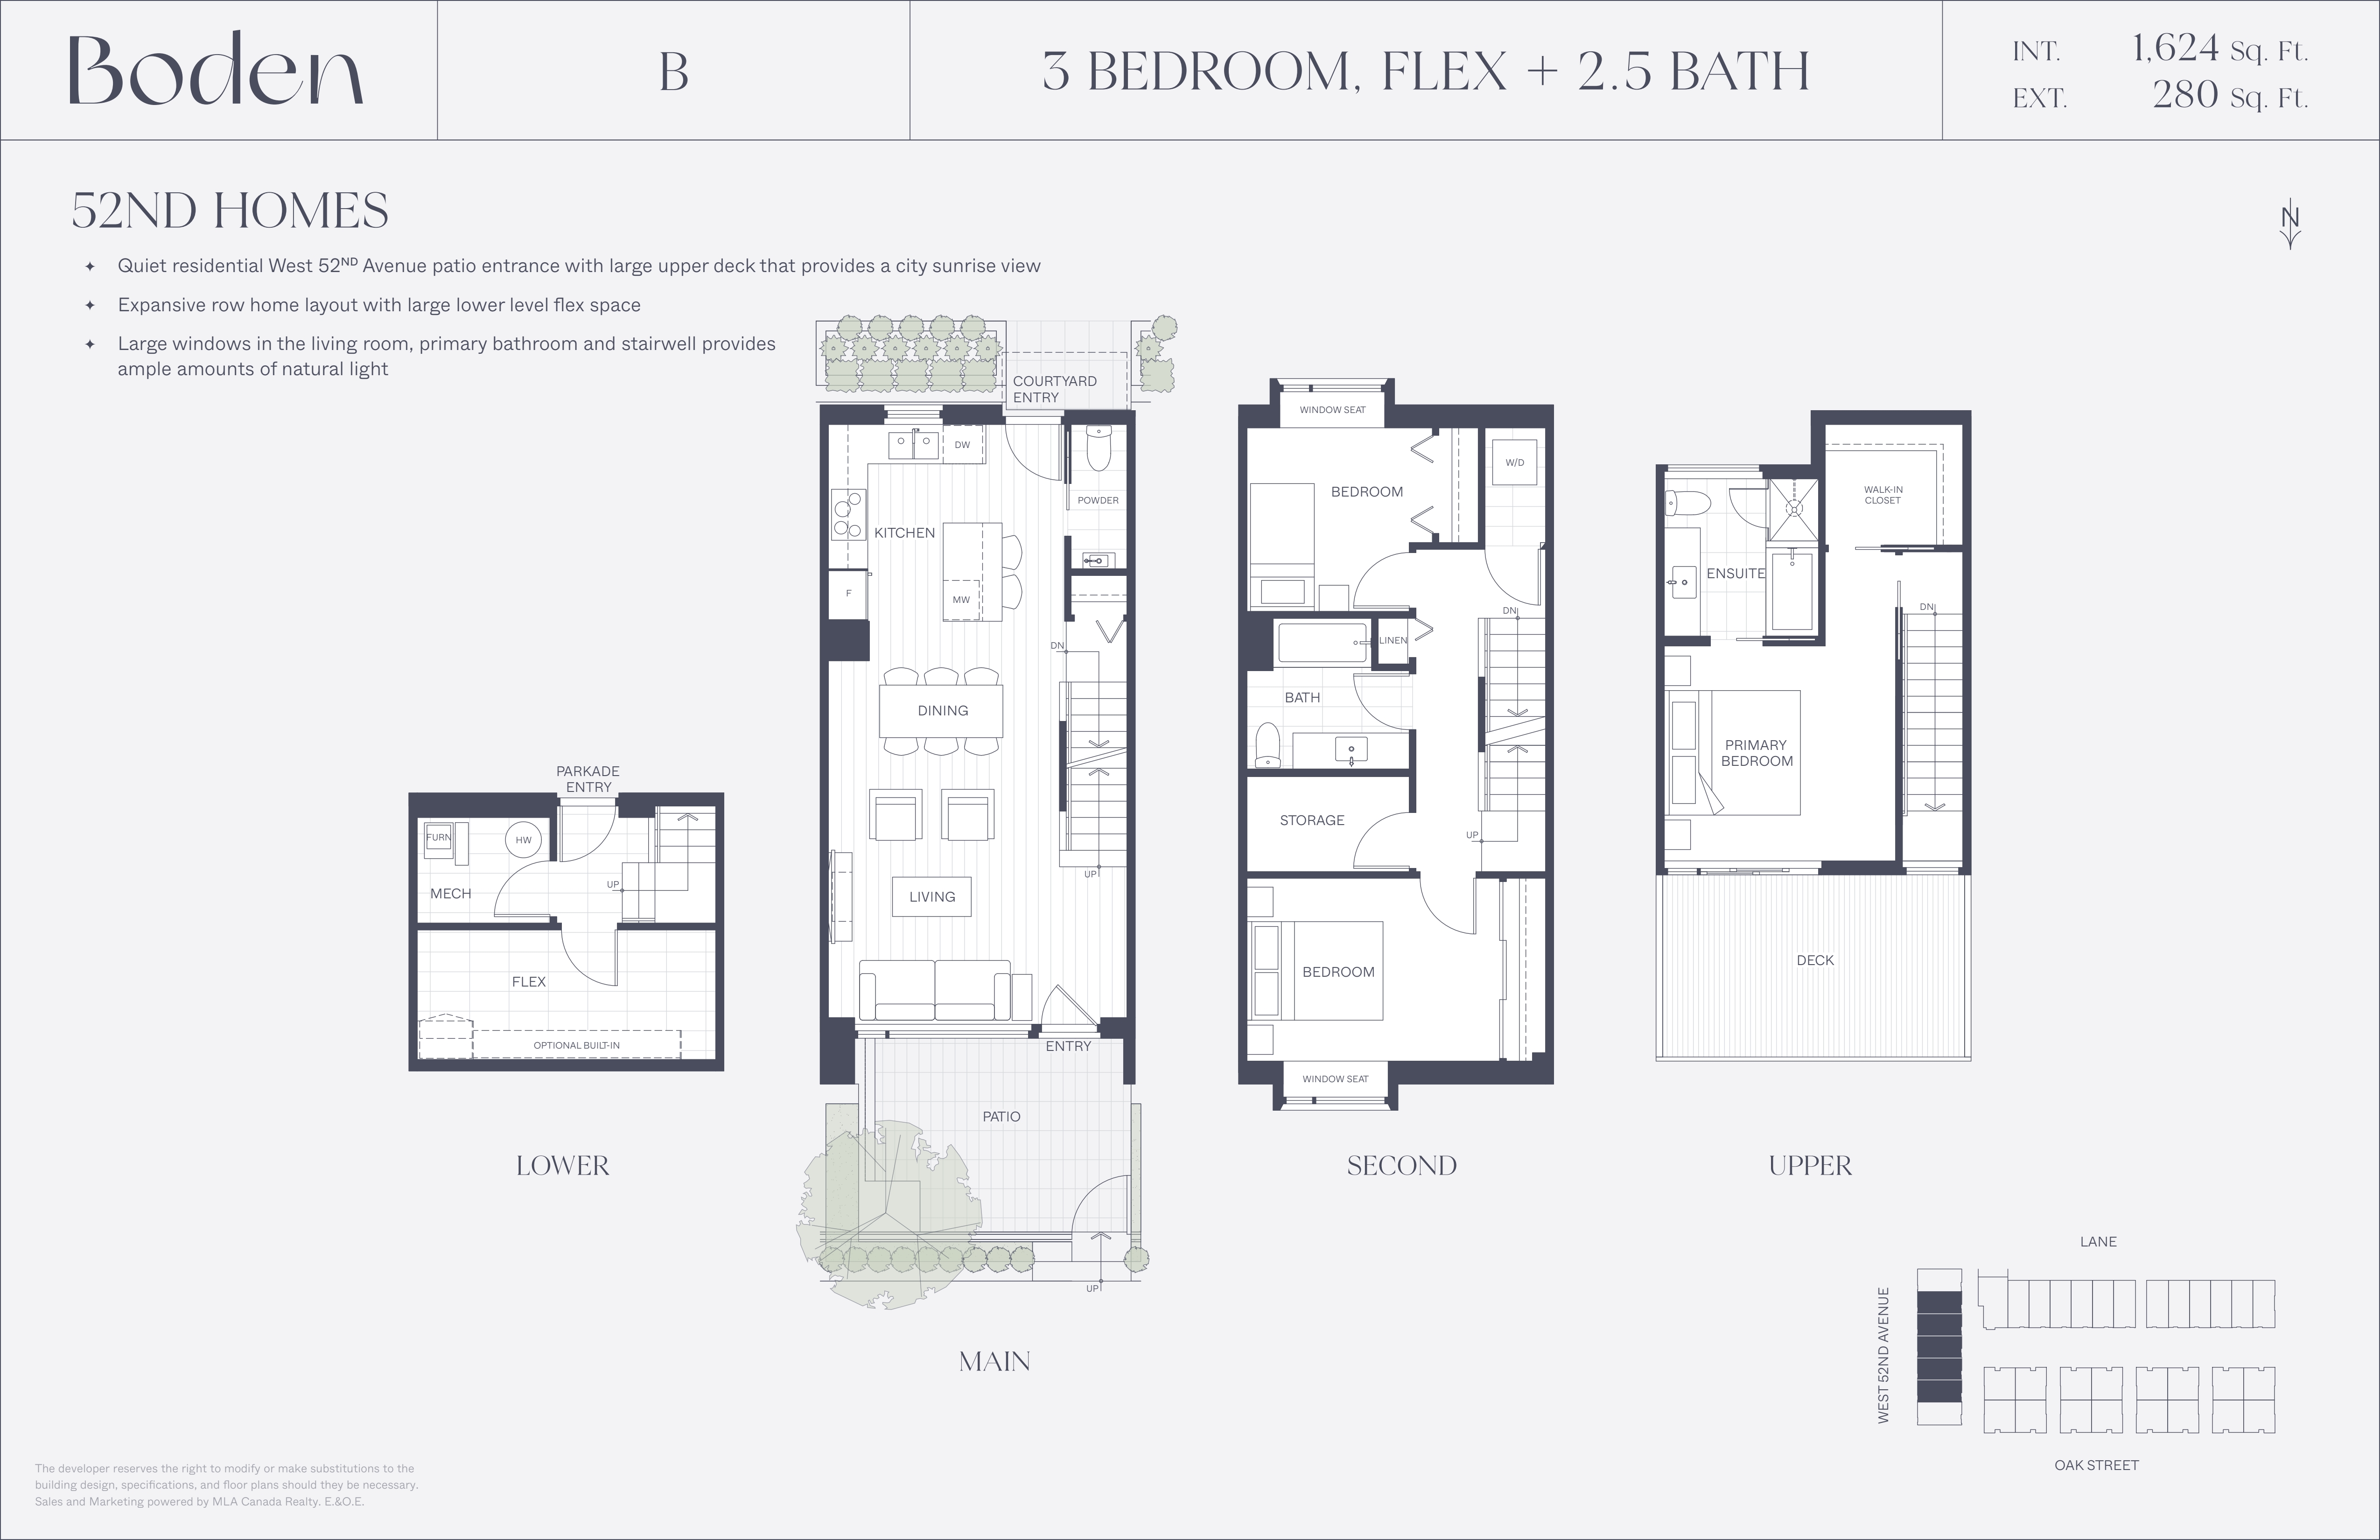 B Floor Plan of Boden Towns with undefined beds